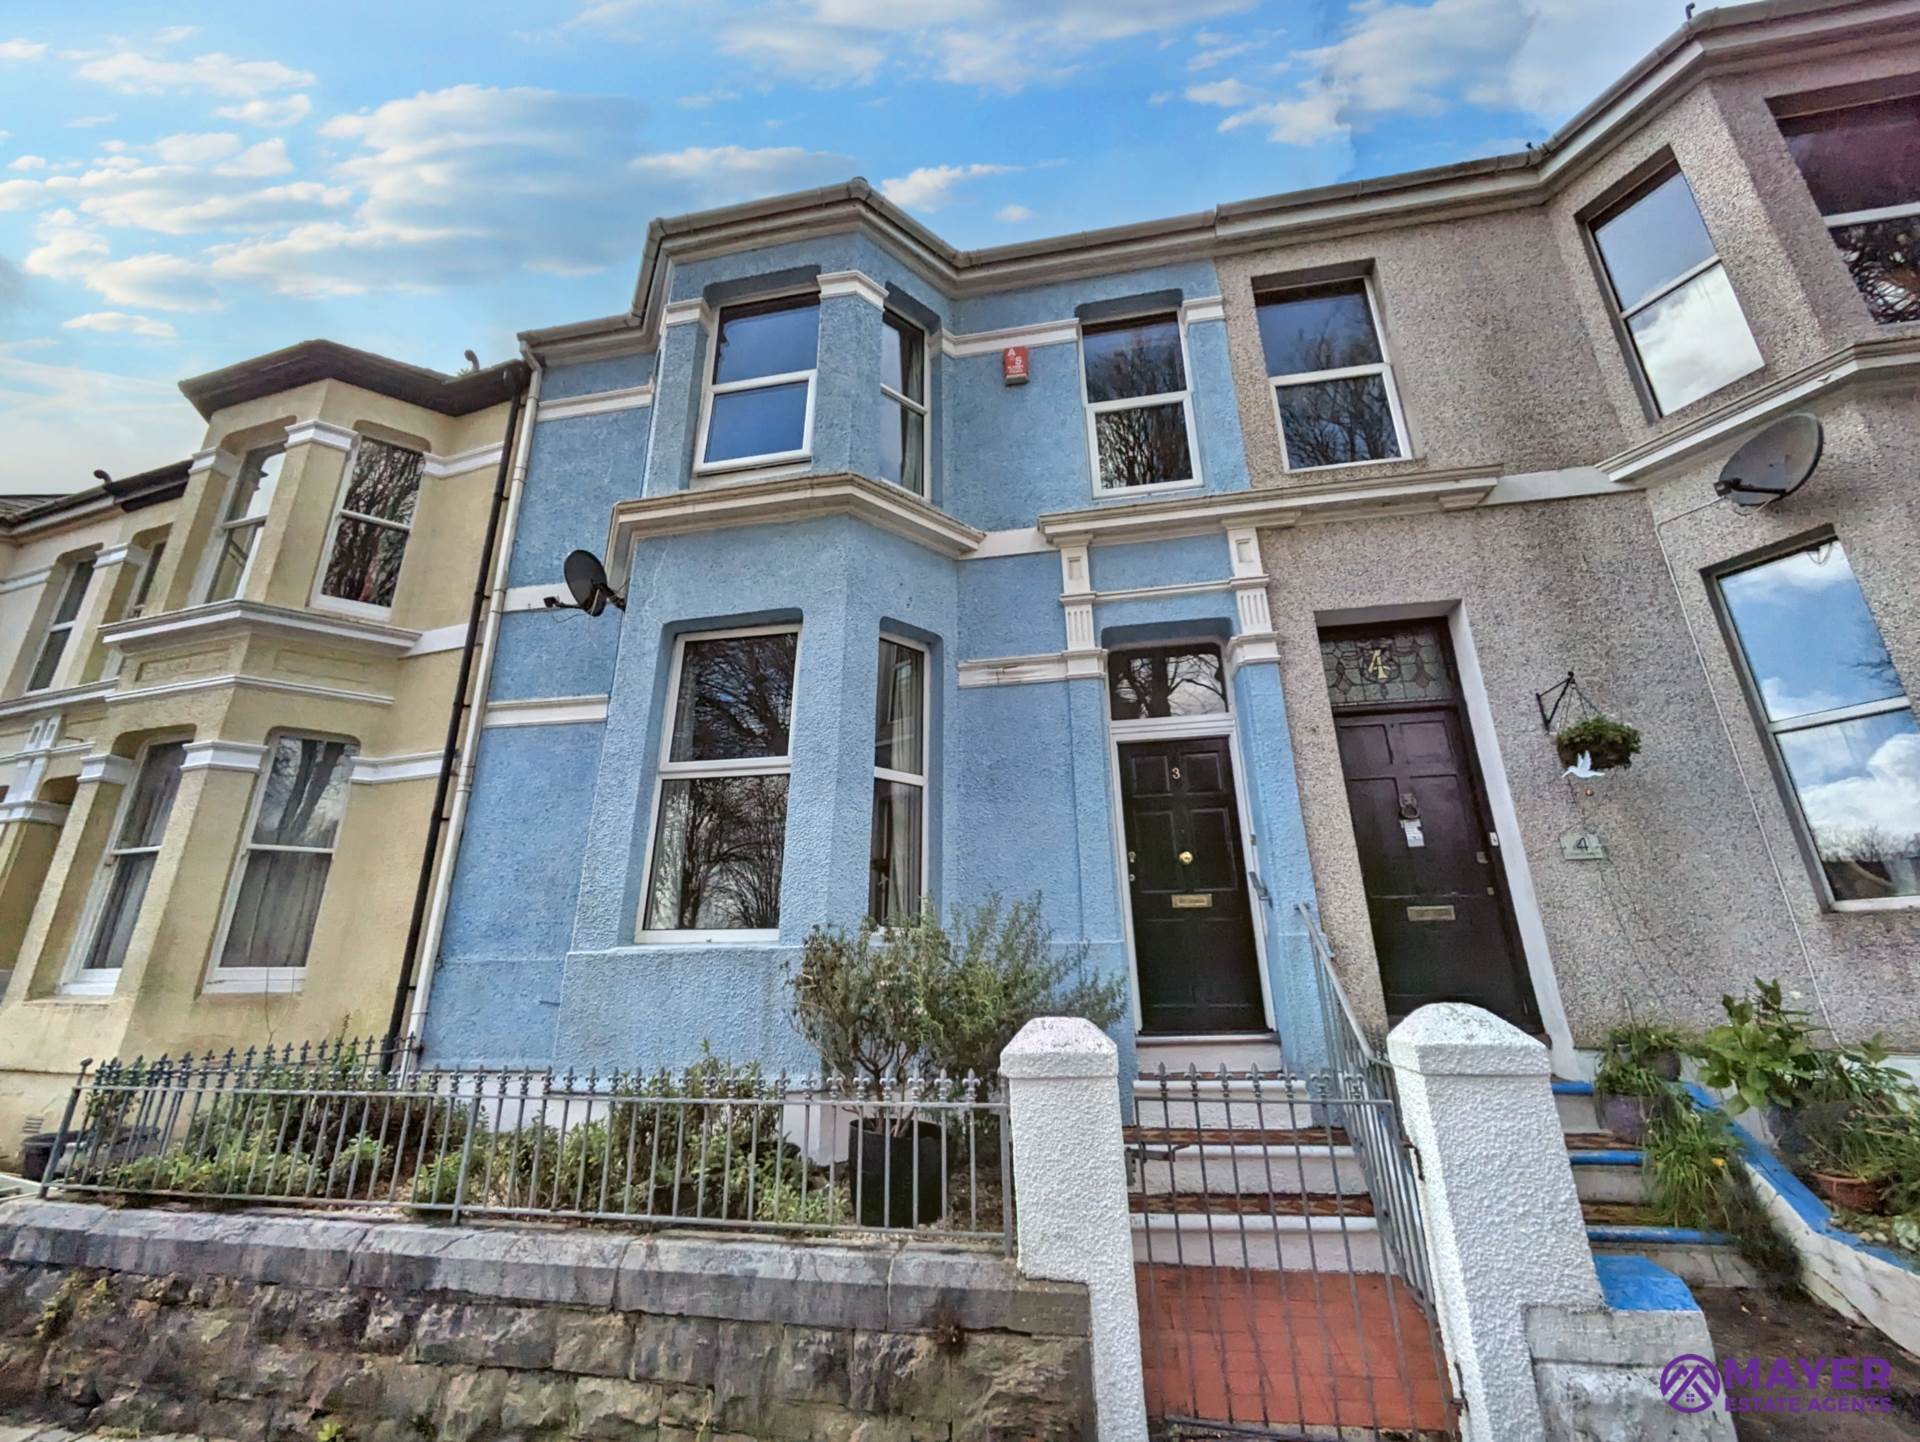 Egerton Crescent, Plymouth, Image 1